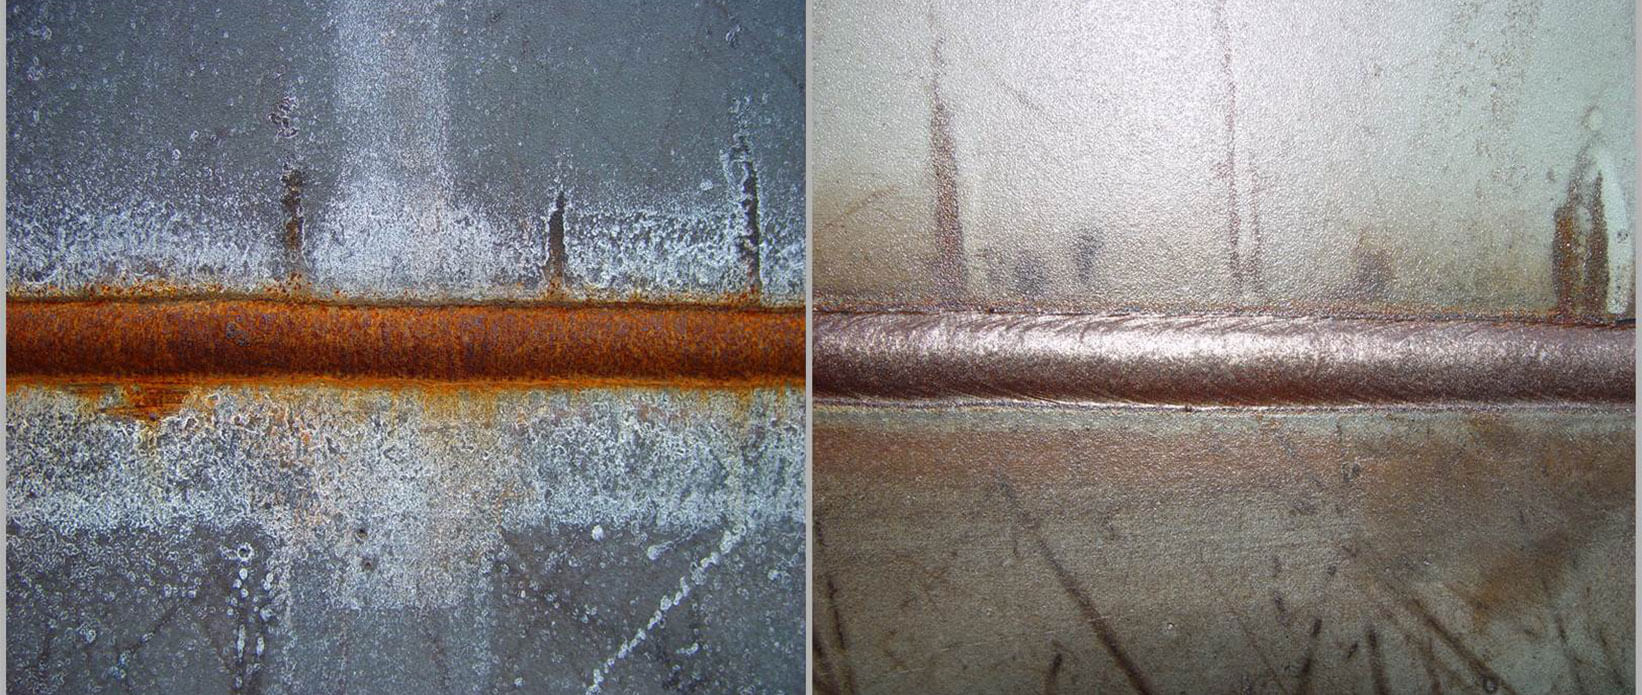 Vessel Welding Surface Rust Cleaning (Before & After)